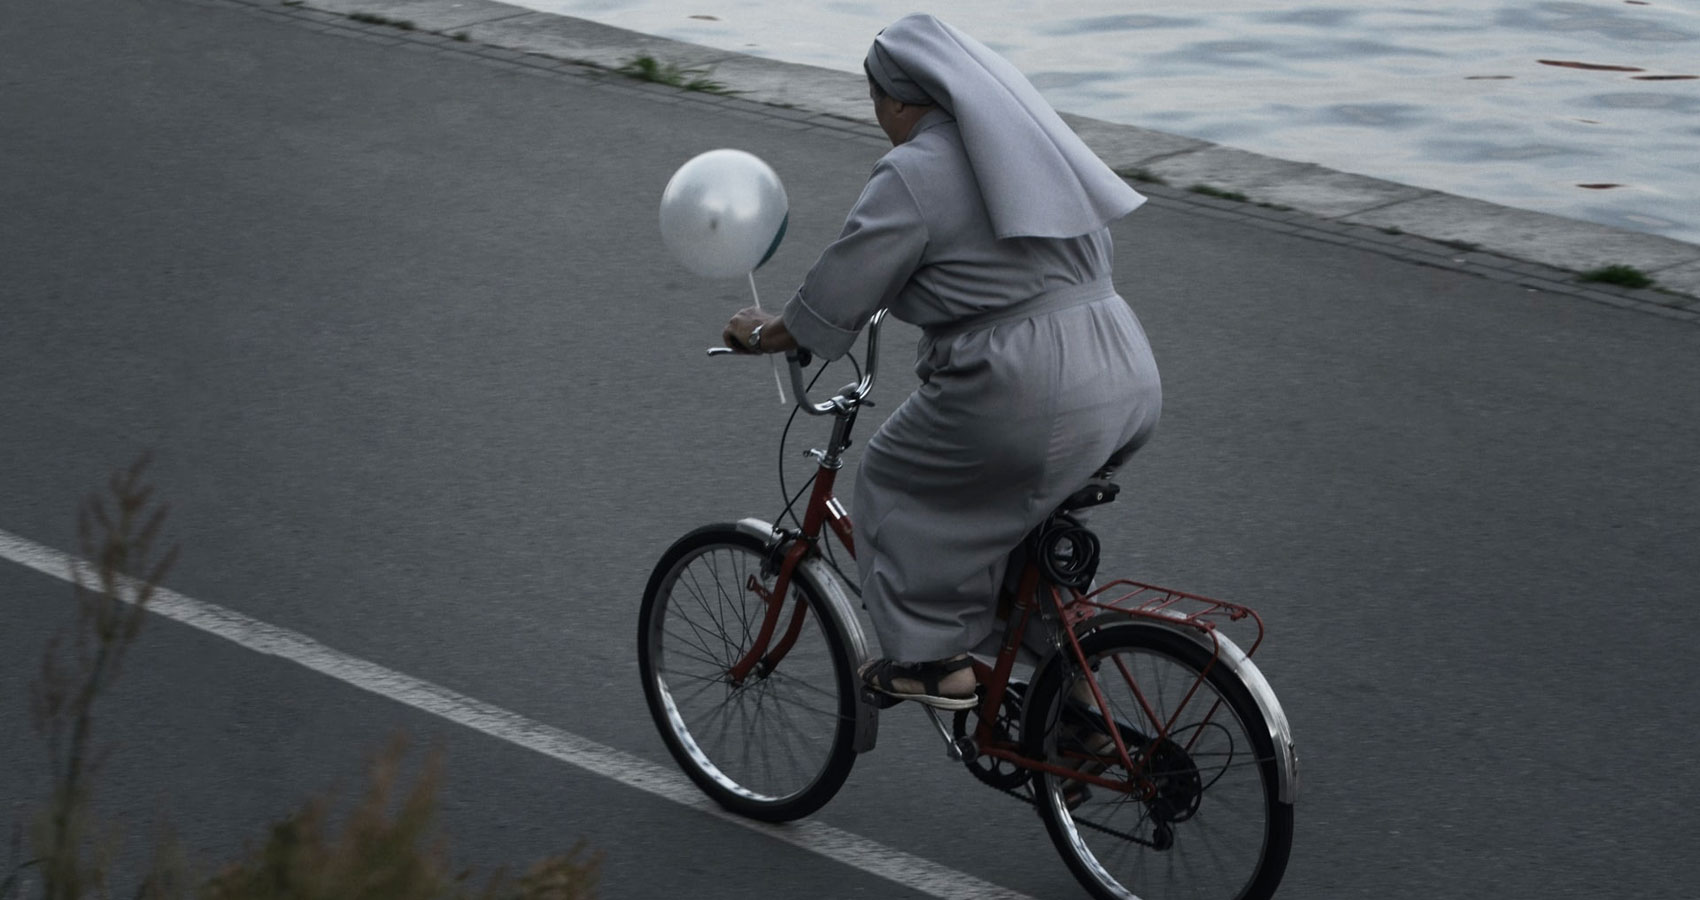 The Nun on The Bicycle, a poem by Robin McNamara at Spillwords.com